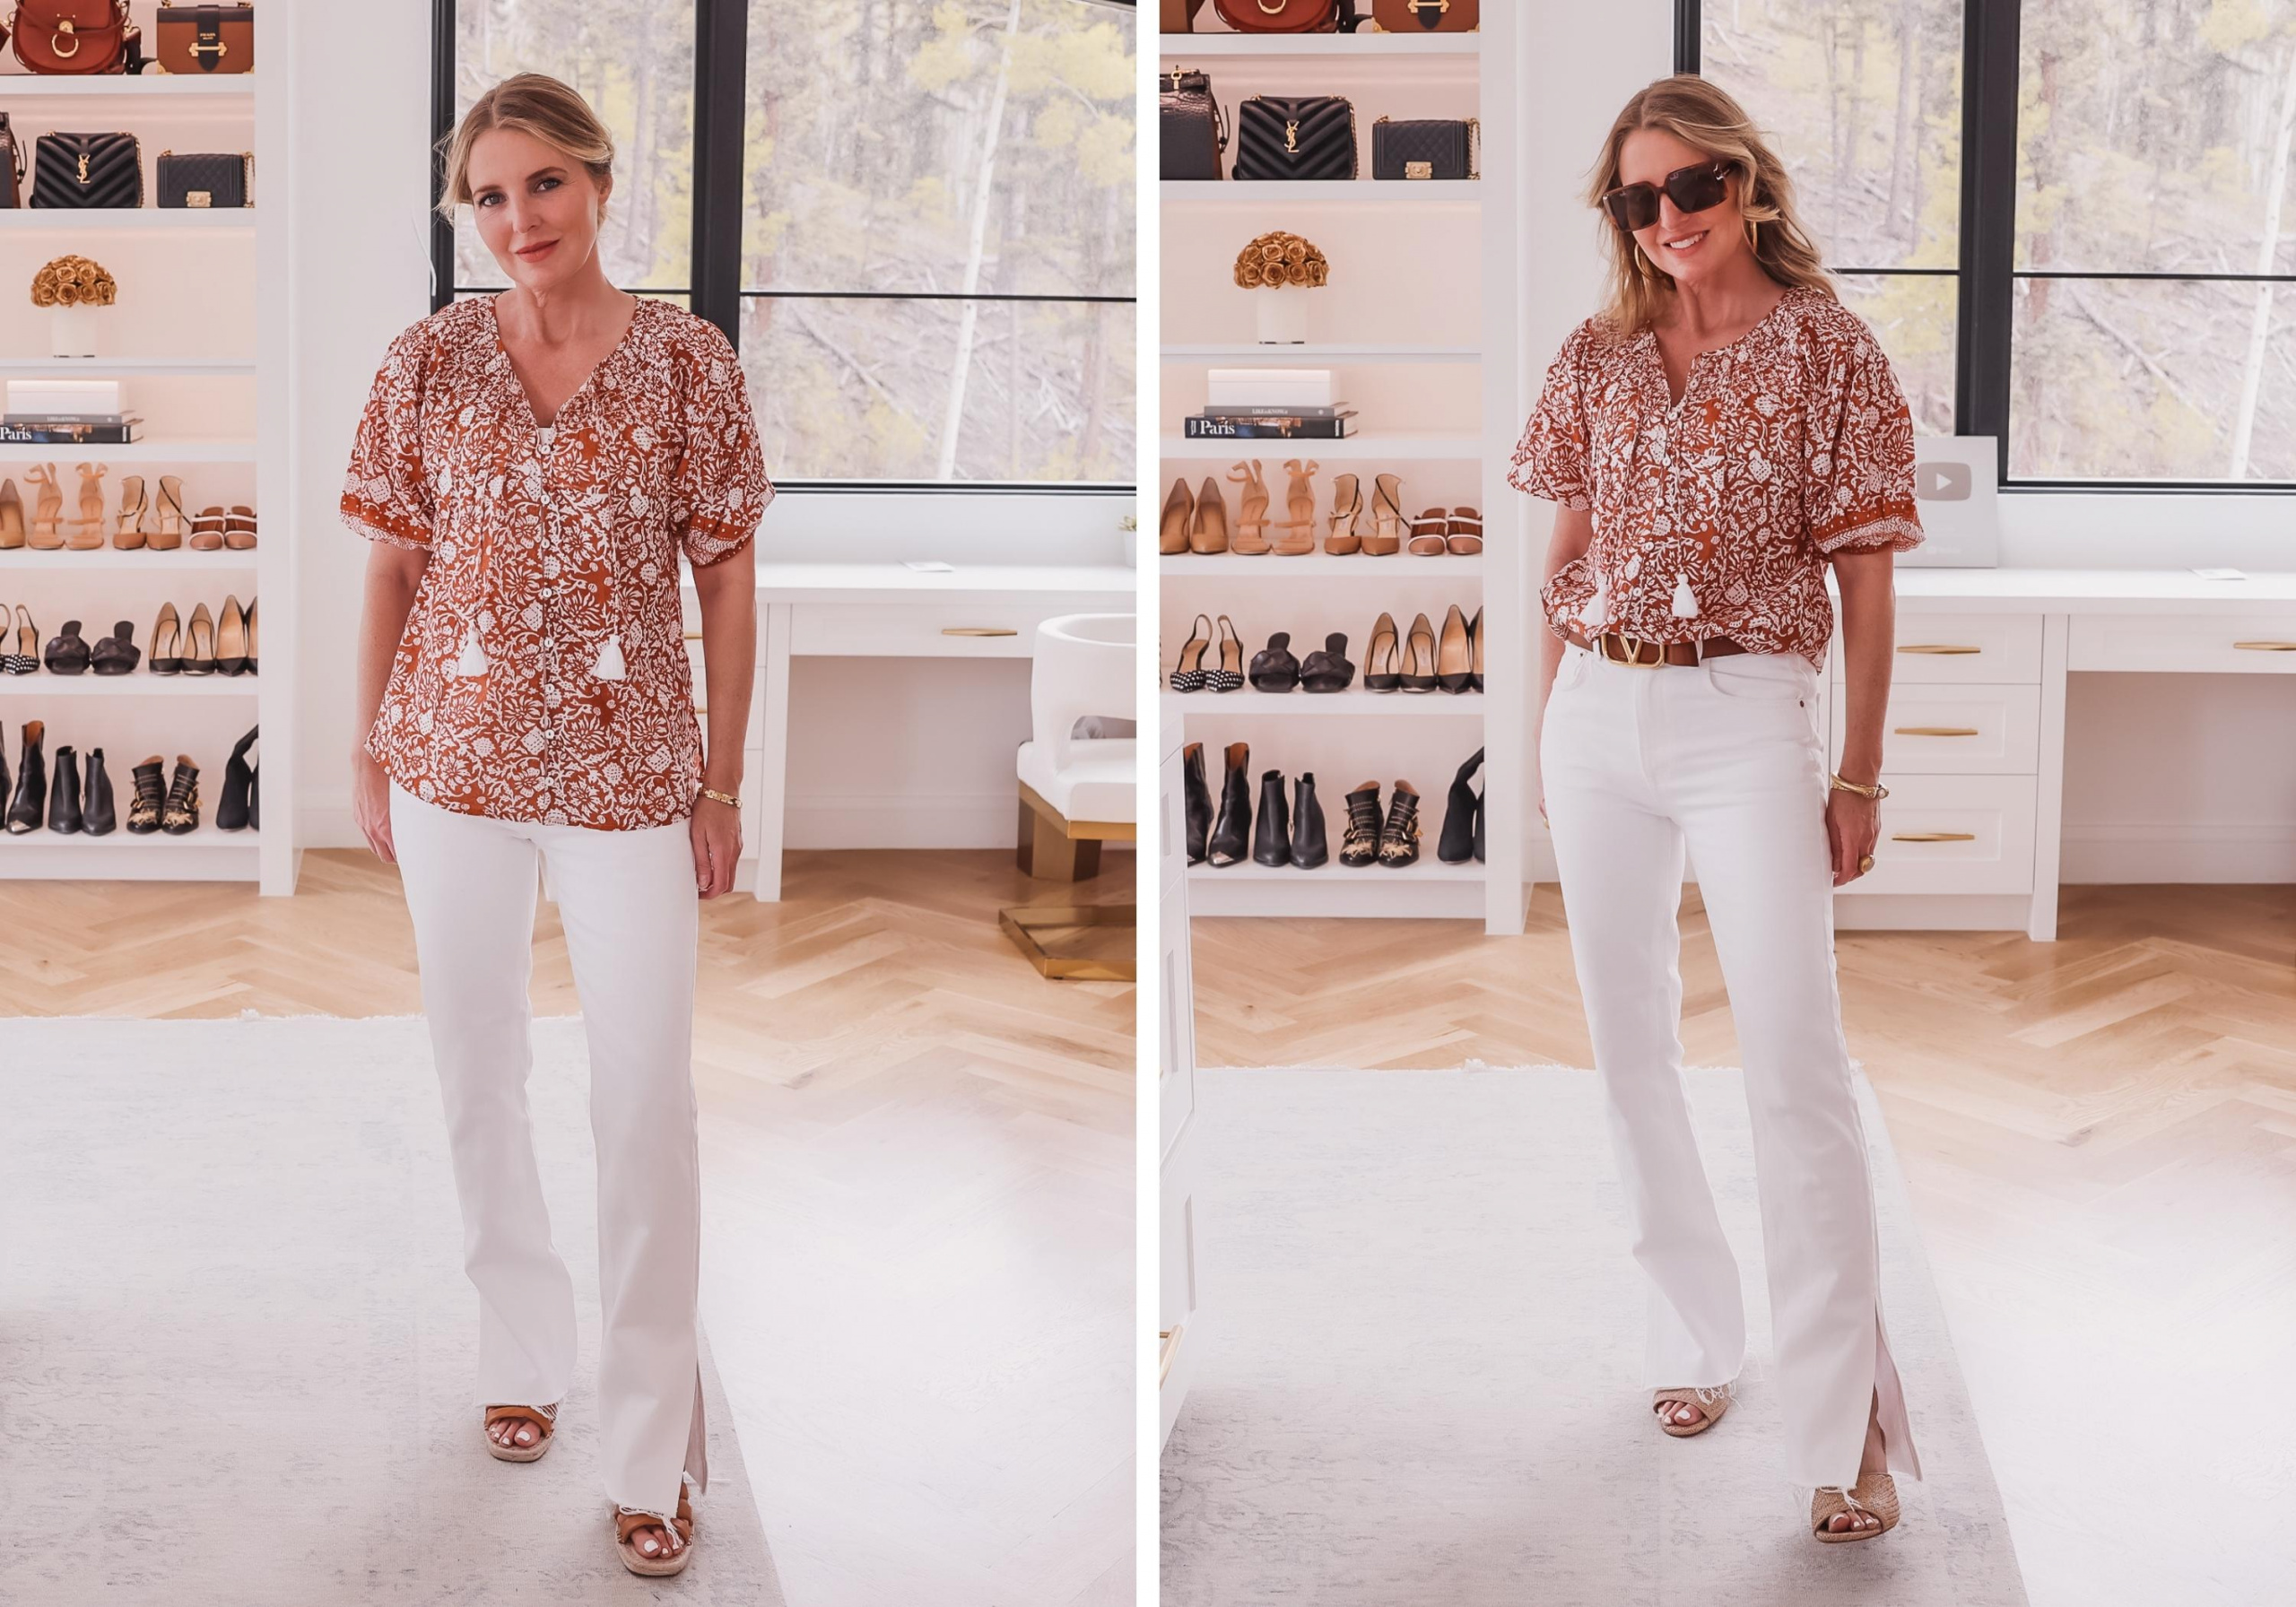 how to elevate your everyday style, how to elevate your appearance, how to elevate a simple outfit, how to elevate wardrobe, how to look classy and rich, how to look casual but stylish, fine to fab, erin busbee, busbee style, fashion over 40, telluride, Colorado, cleobella printe blouse grlfrnd white split hem jeans, veronica beard woven sandals, dean davidson hoops, saint laurent sunglasses